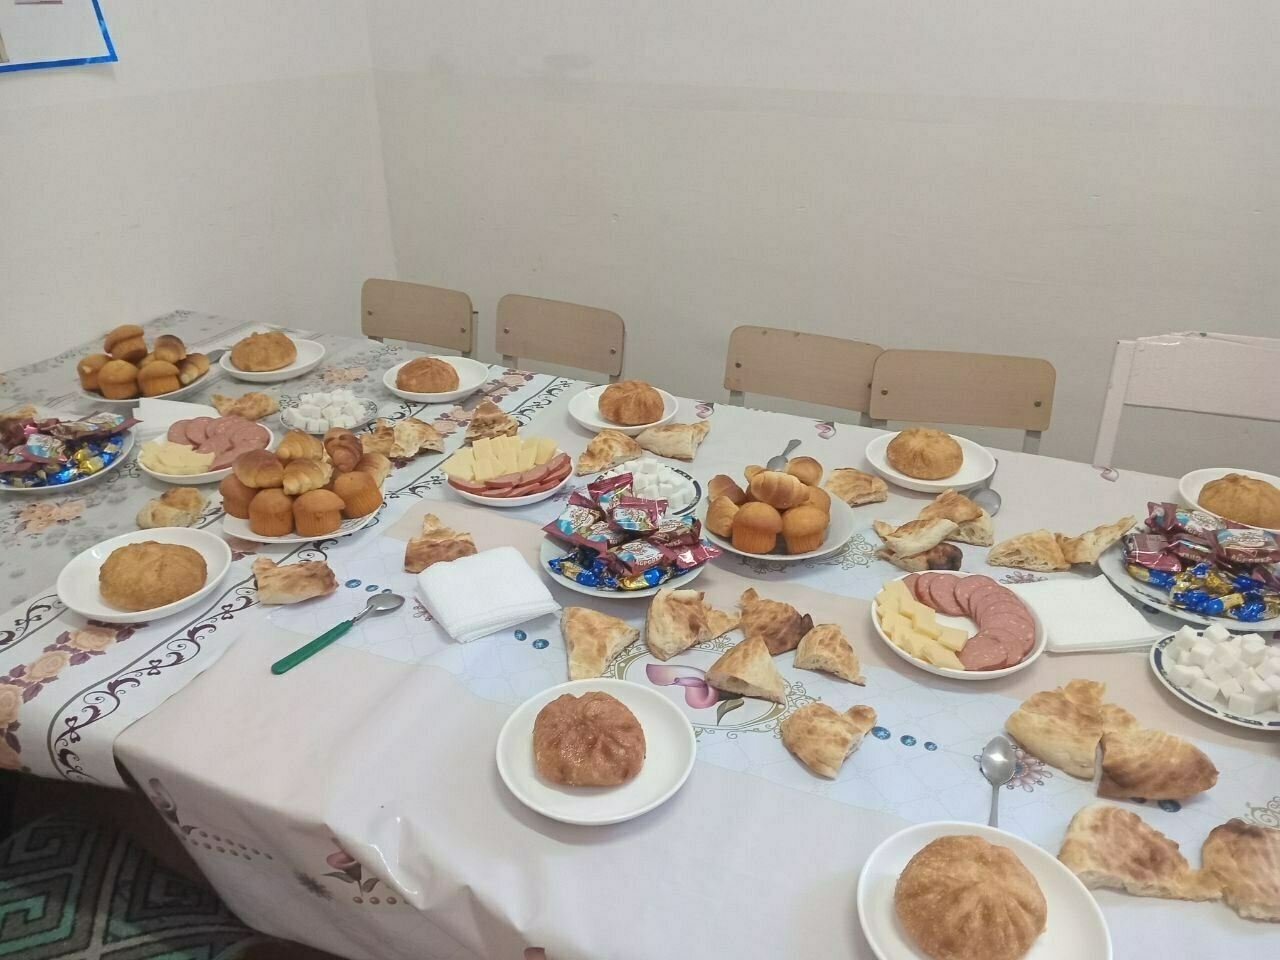 typical Kyrgyz table set up with pastries, candies, cheese and sausage slices, and hoshan (a kind of oily, fried Kyrgyz bun with meat and onions inside) as the main course